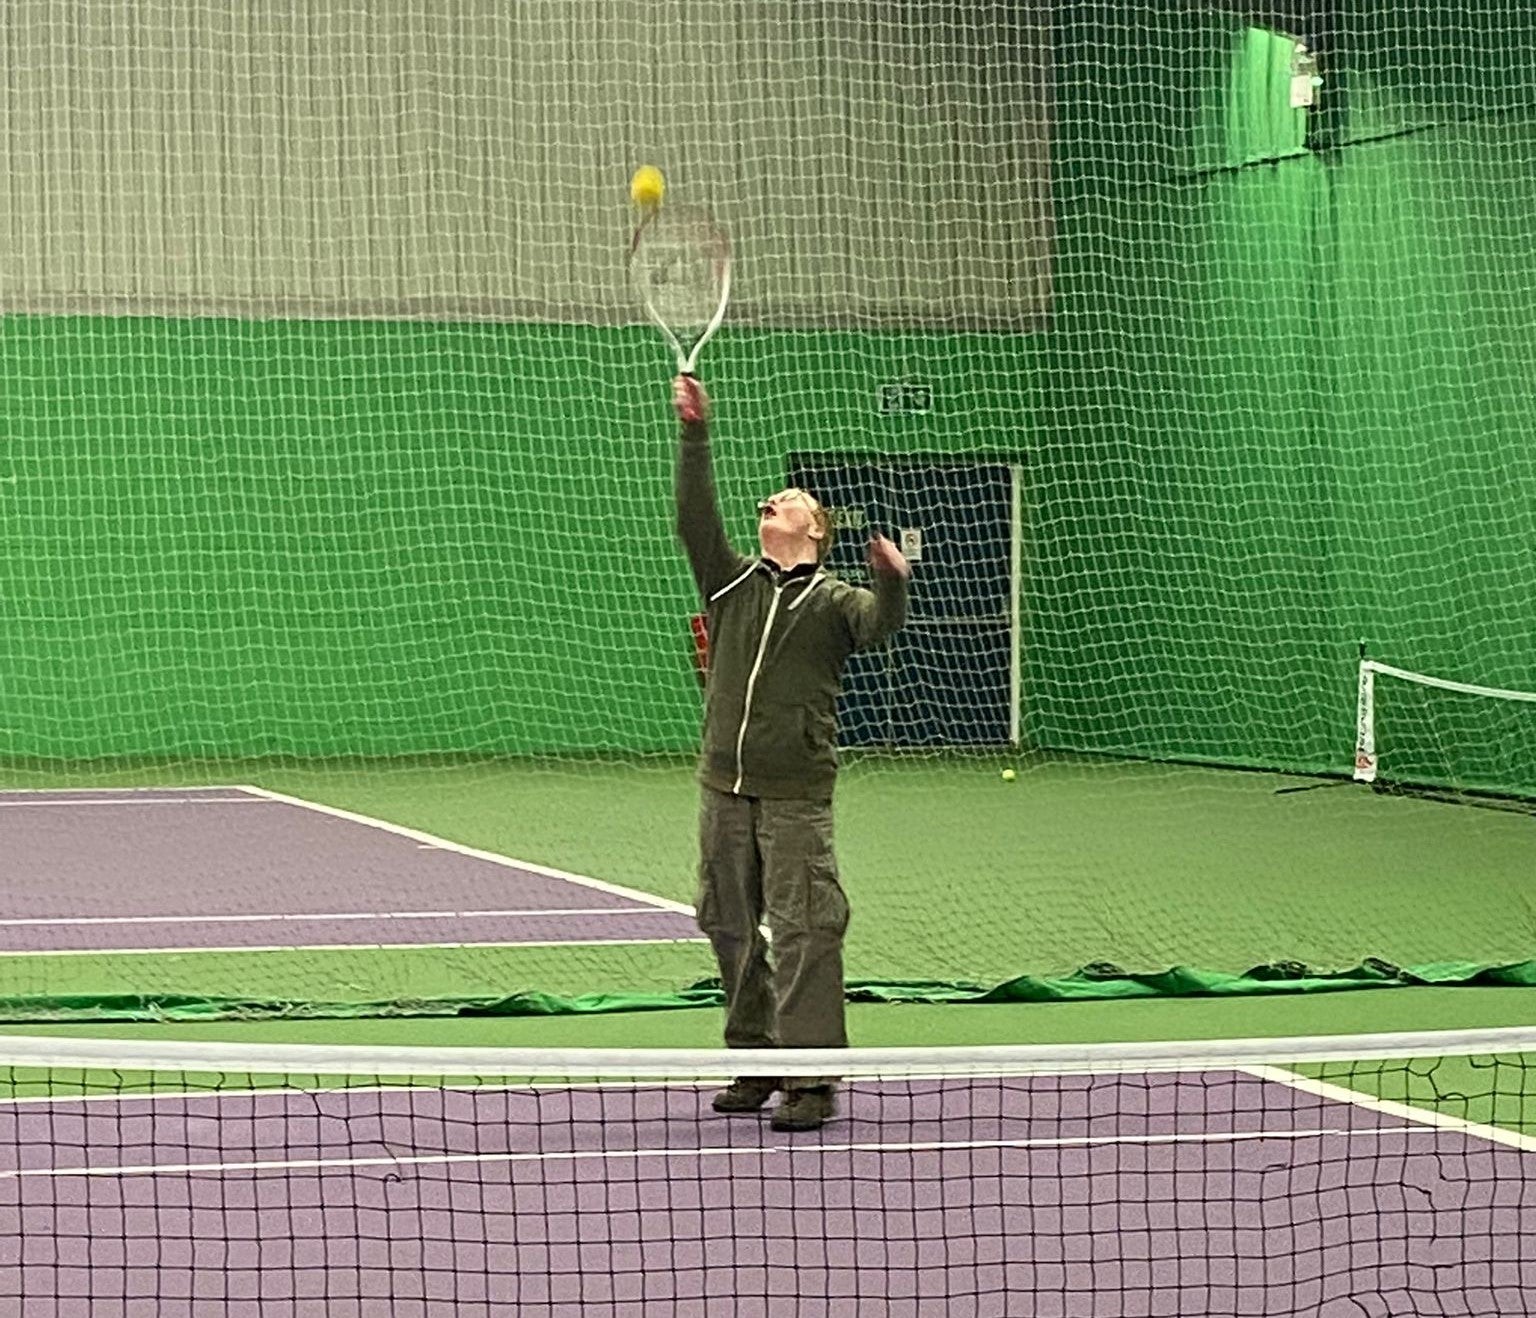 Man playing tennis on an indoor court